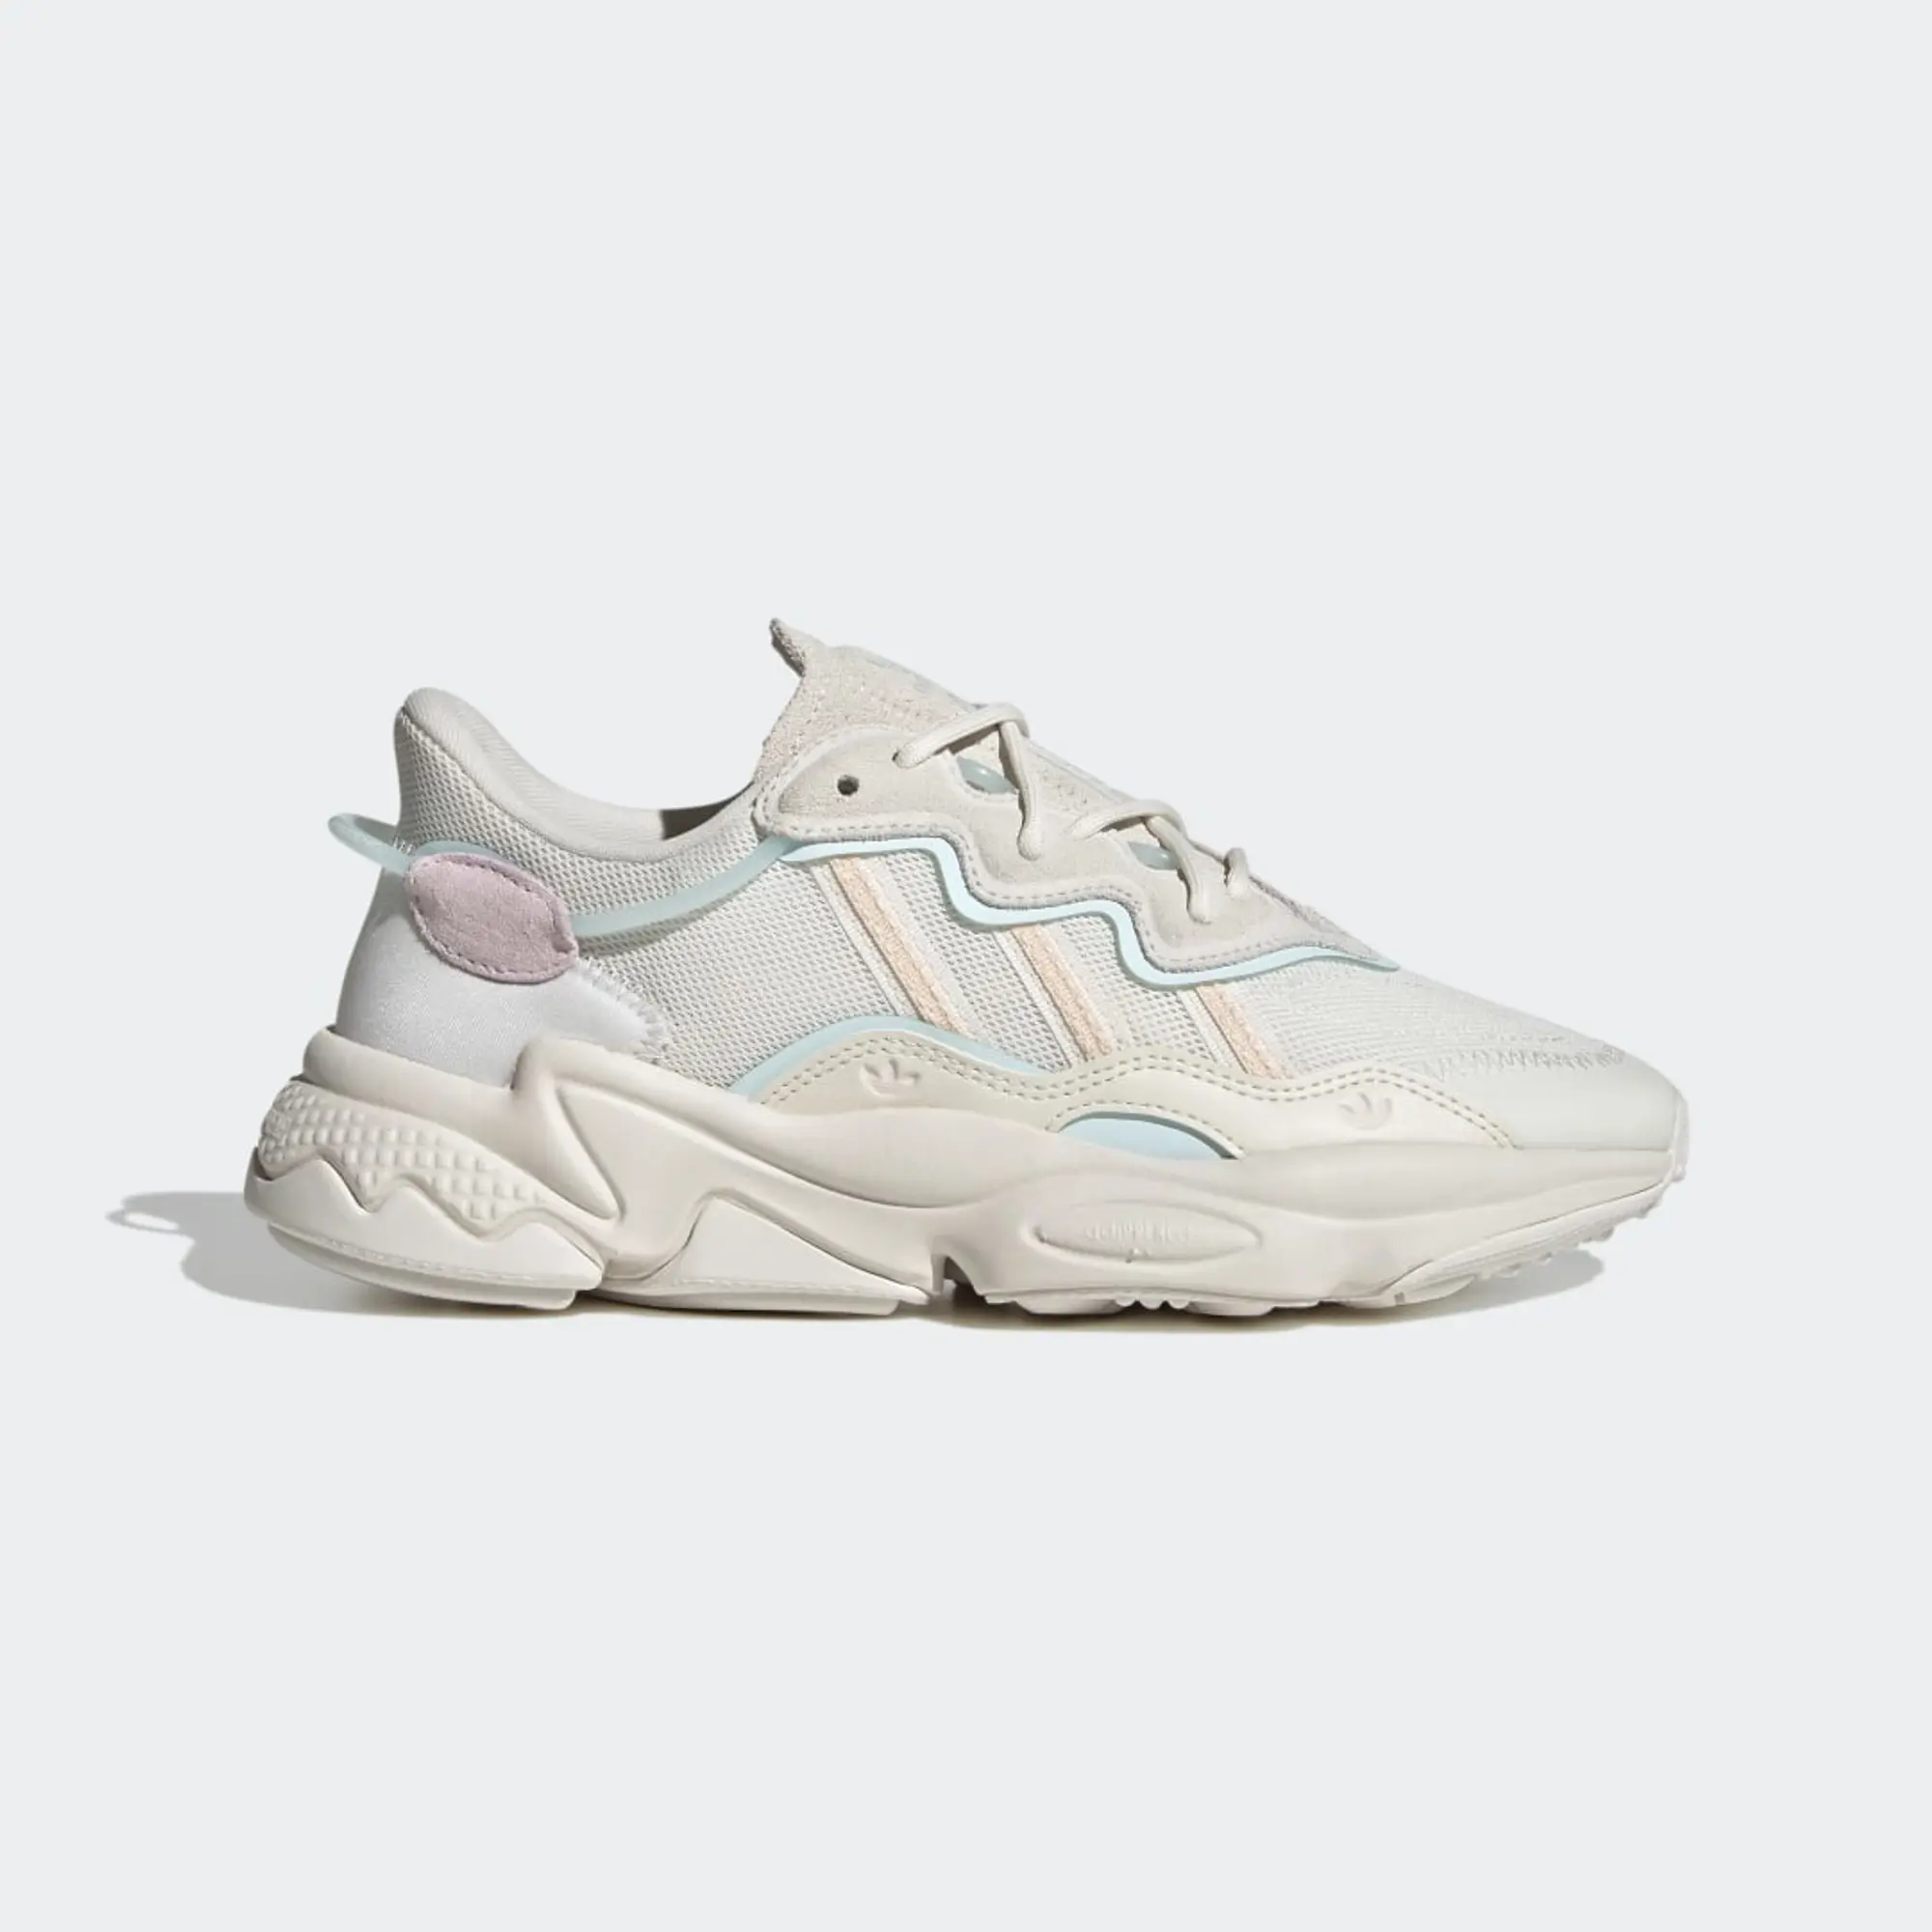 adidas OZWEEGO Shoes - Cloud White / Bliss Orange / Almost Blue